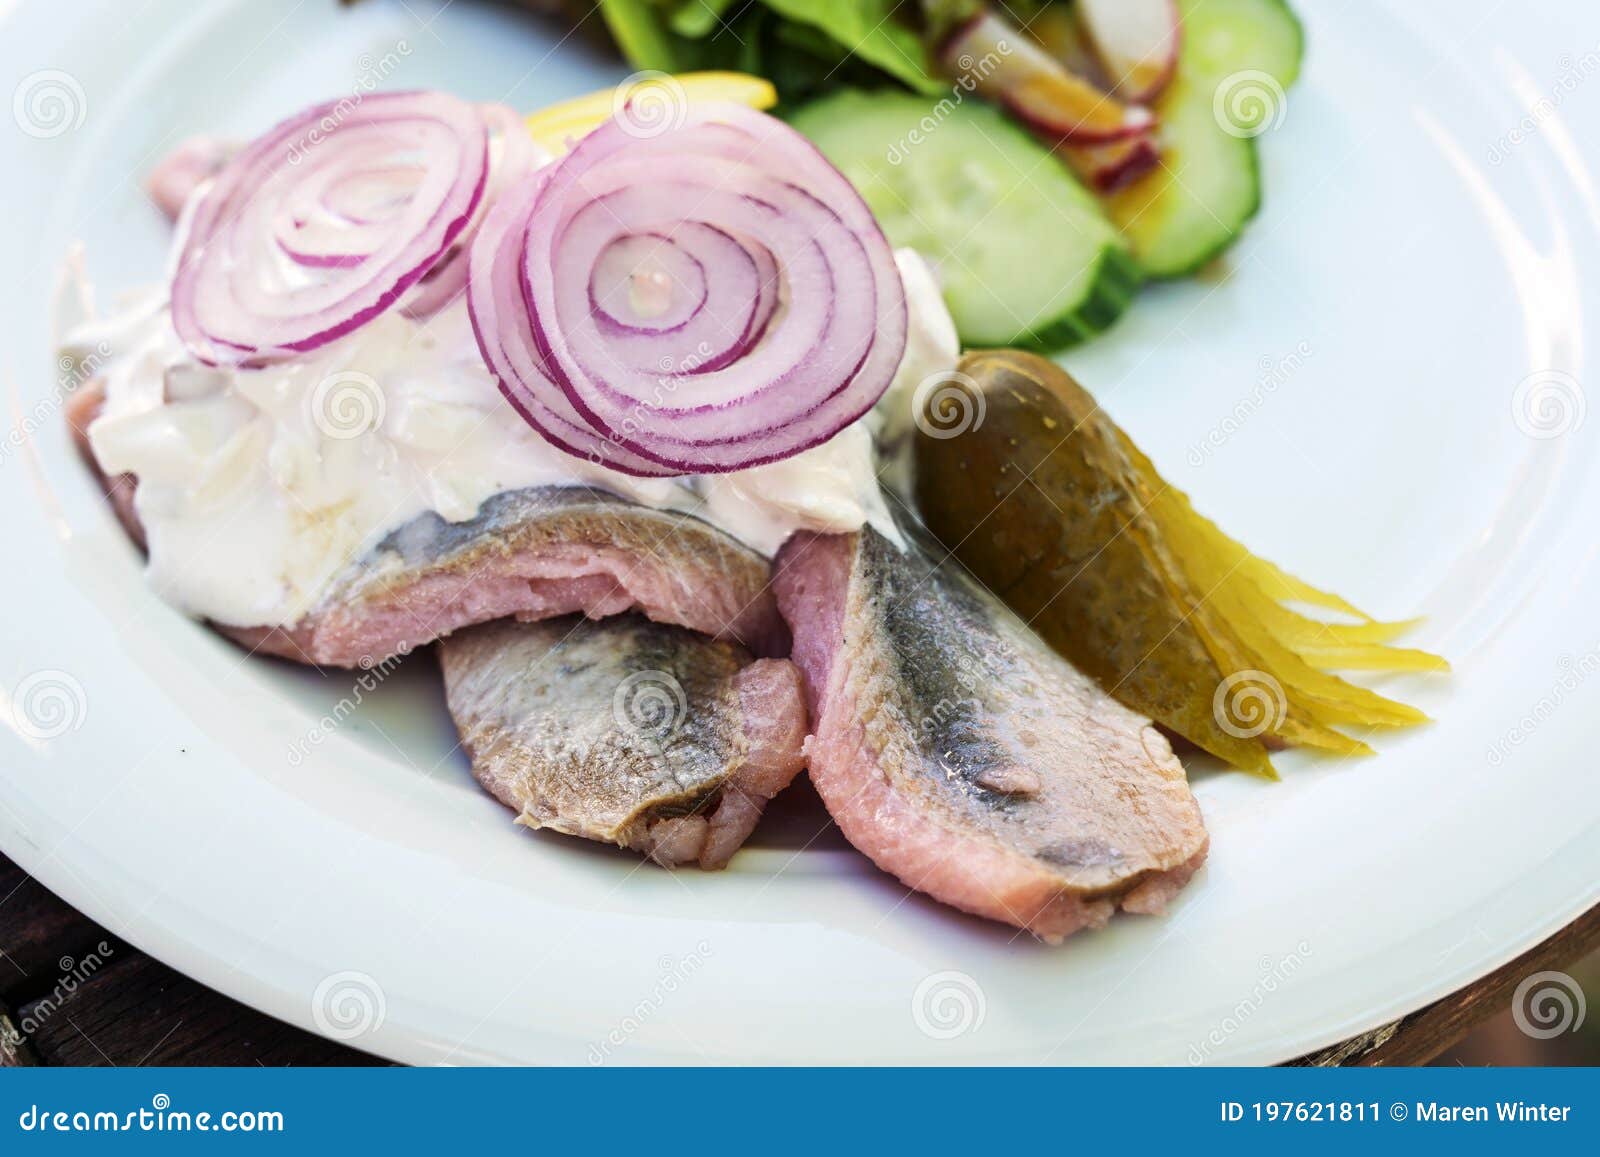 young salted fish called soused or matjes herring with sour cream, gherkin and red onions, served with salad on a white plate,